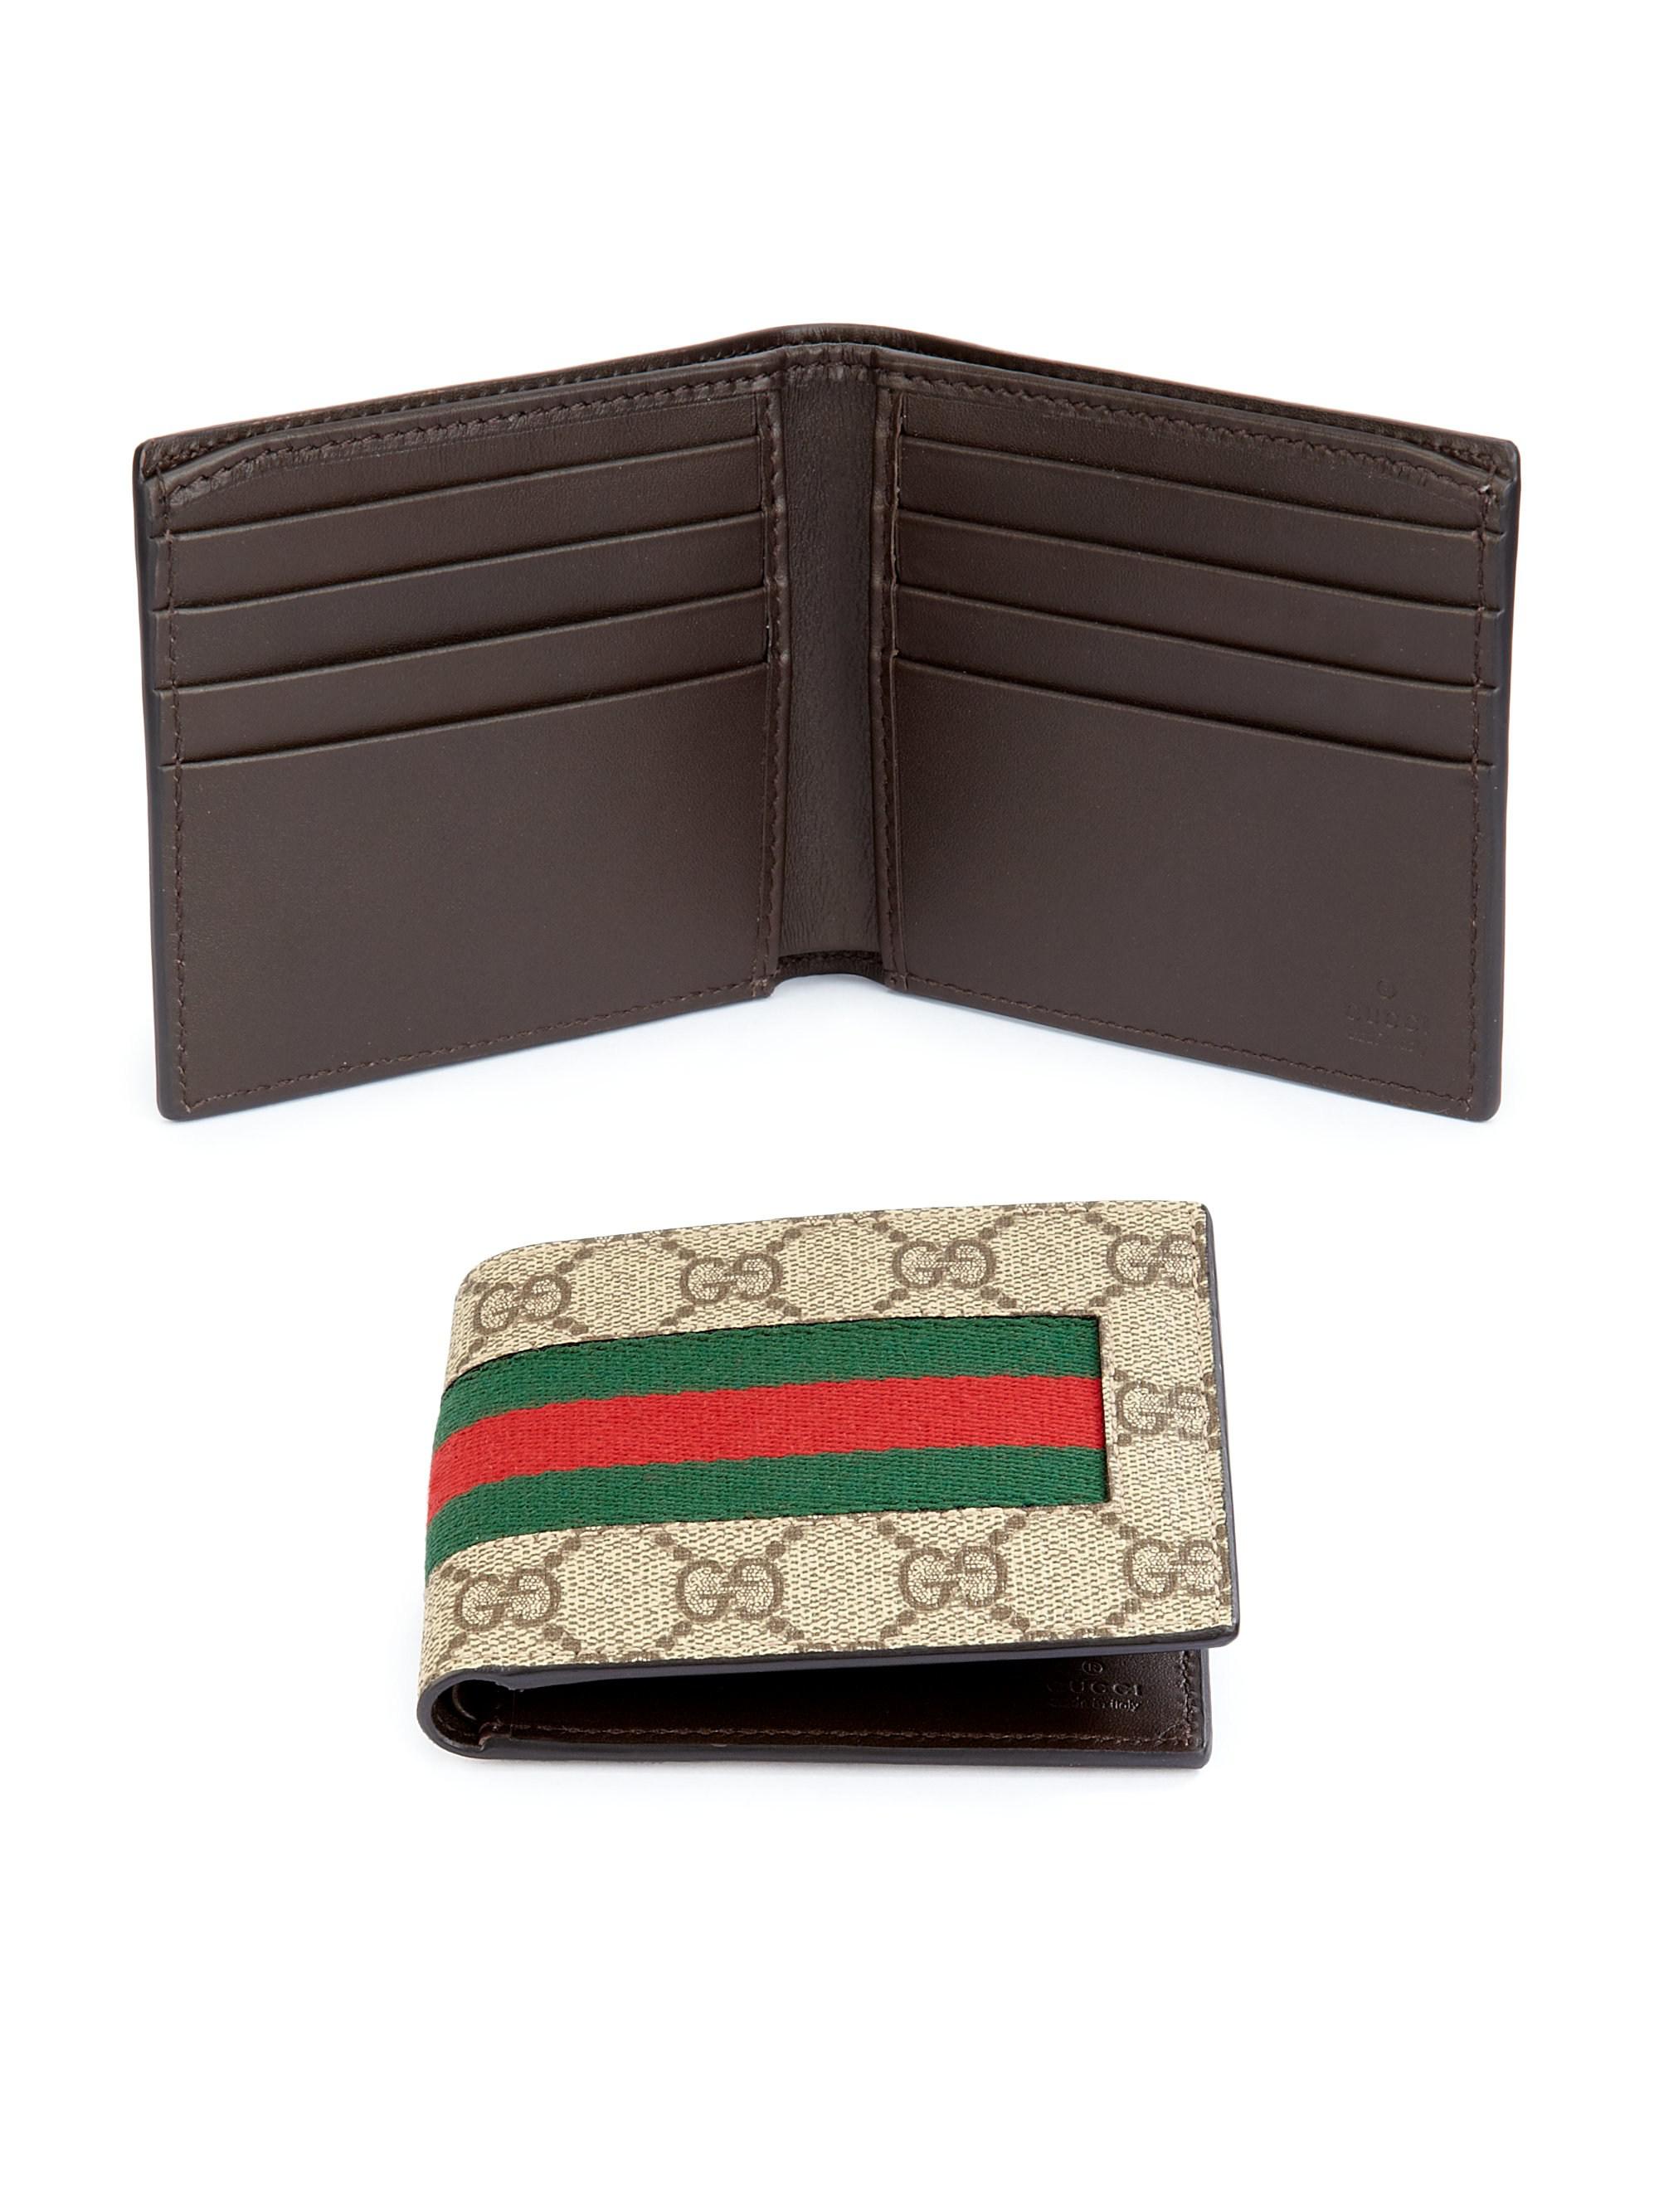 Lyst - Gucci Gg Supreme Canvas Web Bifold Wallet in Green for Men